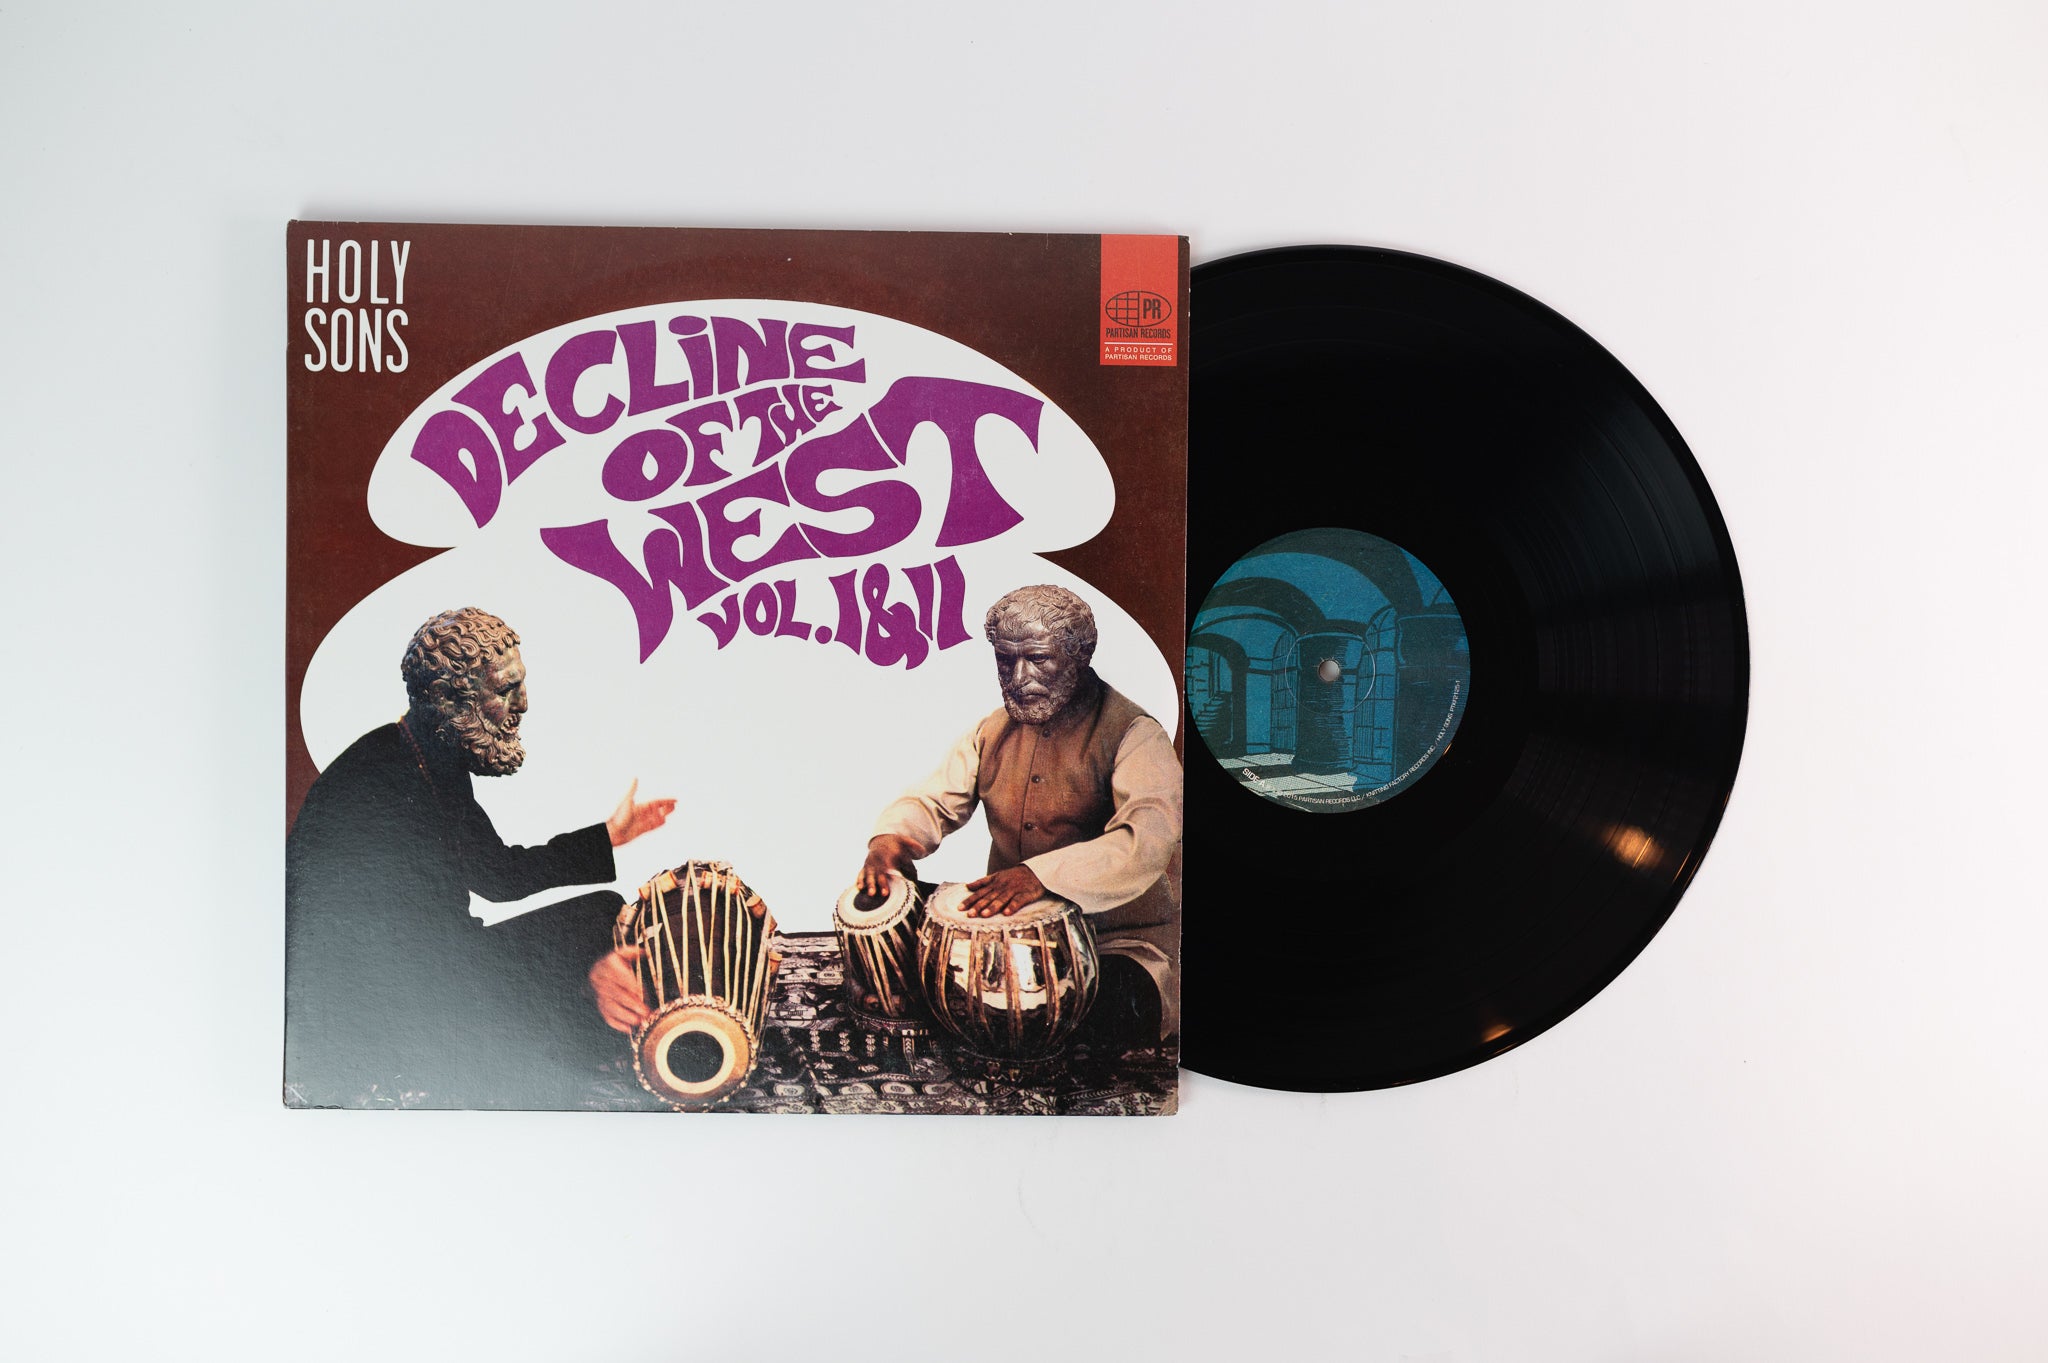 Holy Sons - Decline Of The West Vol. I & II on Partisan